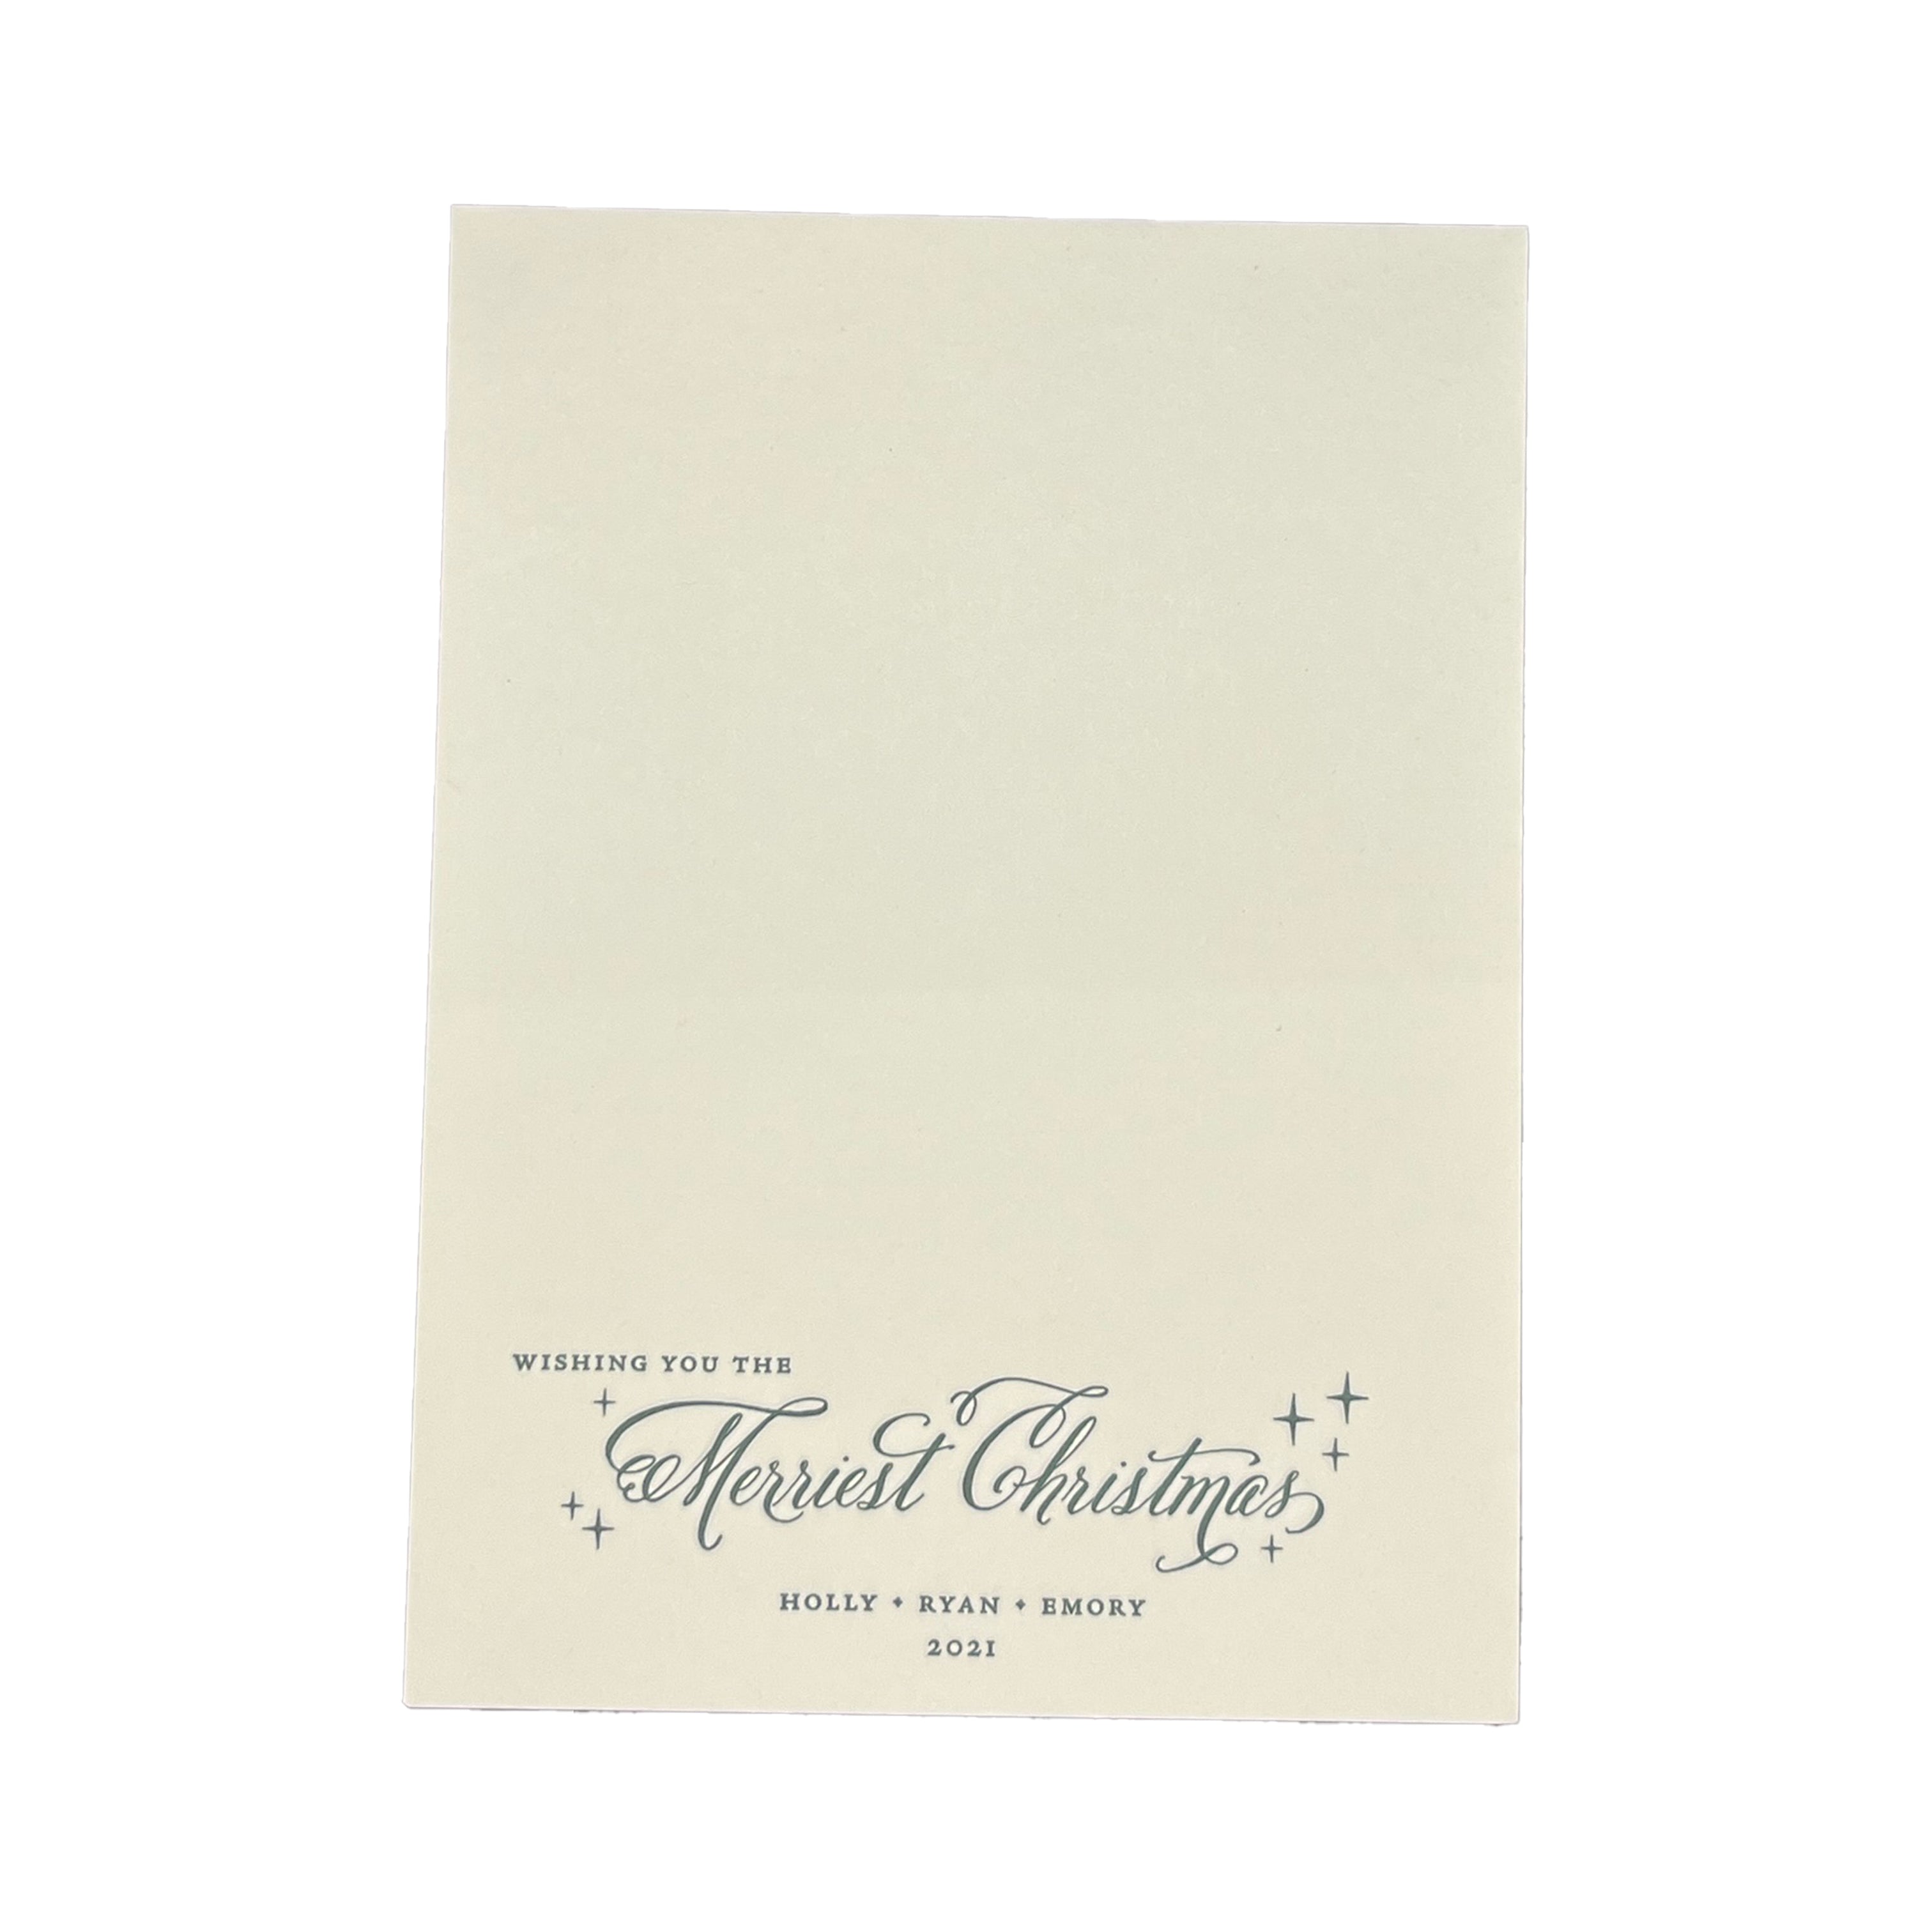 The Emory Holiday Card Stovall Collection